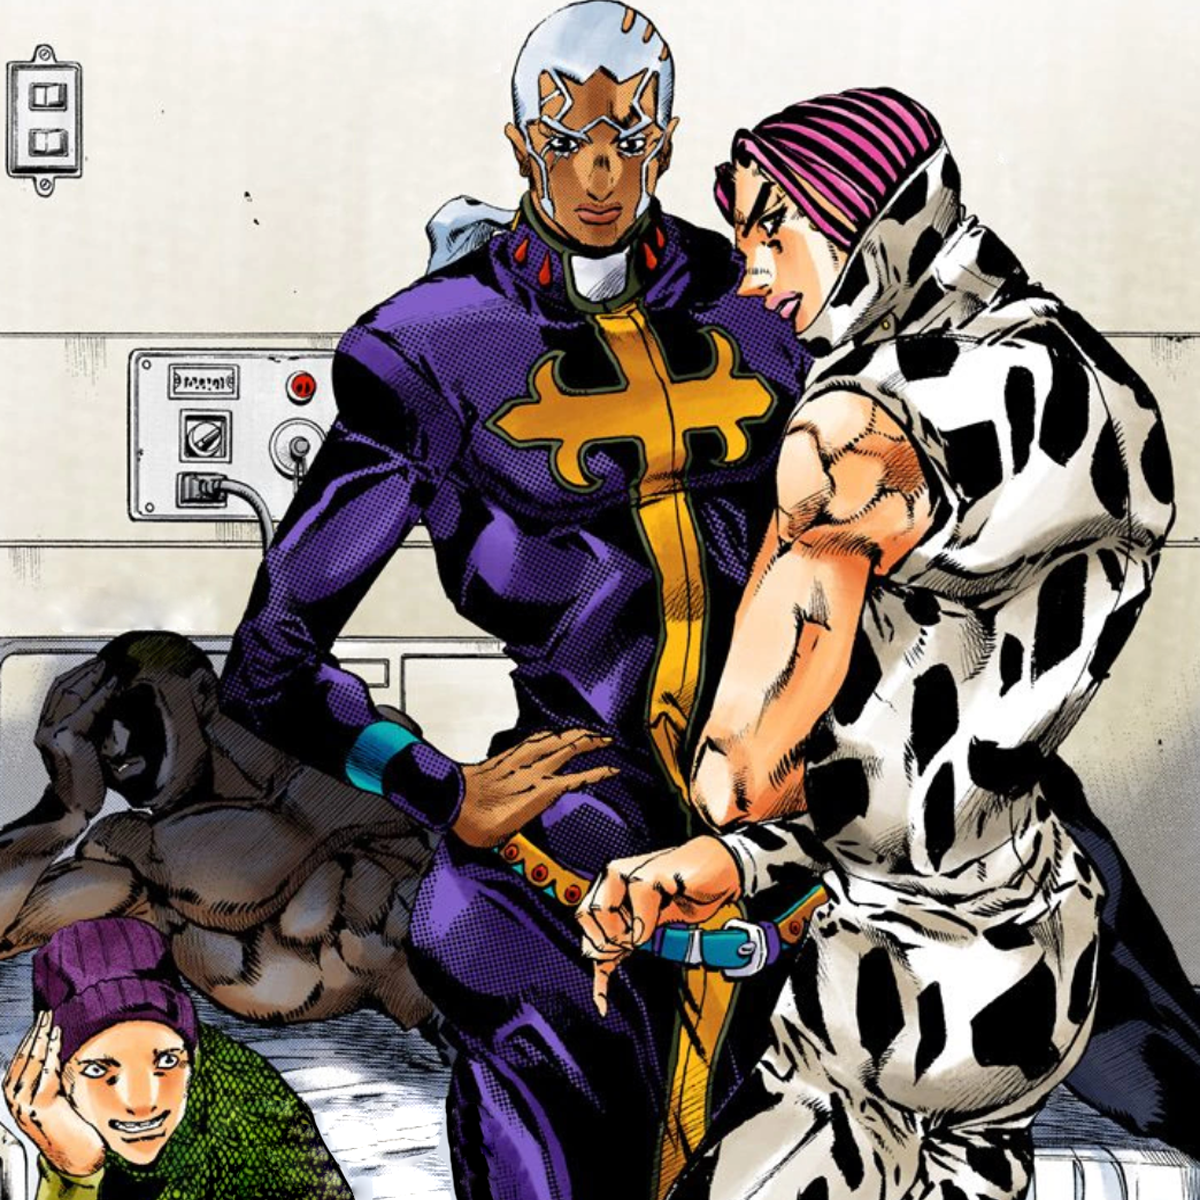 Agents of DIO#Pucci's Agents